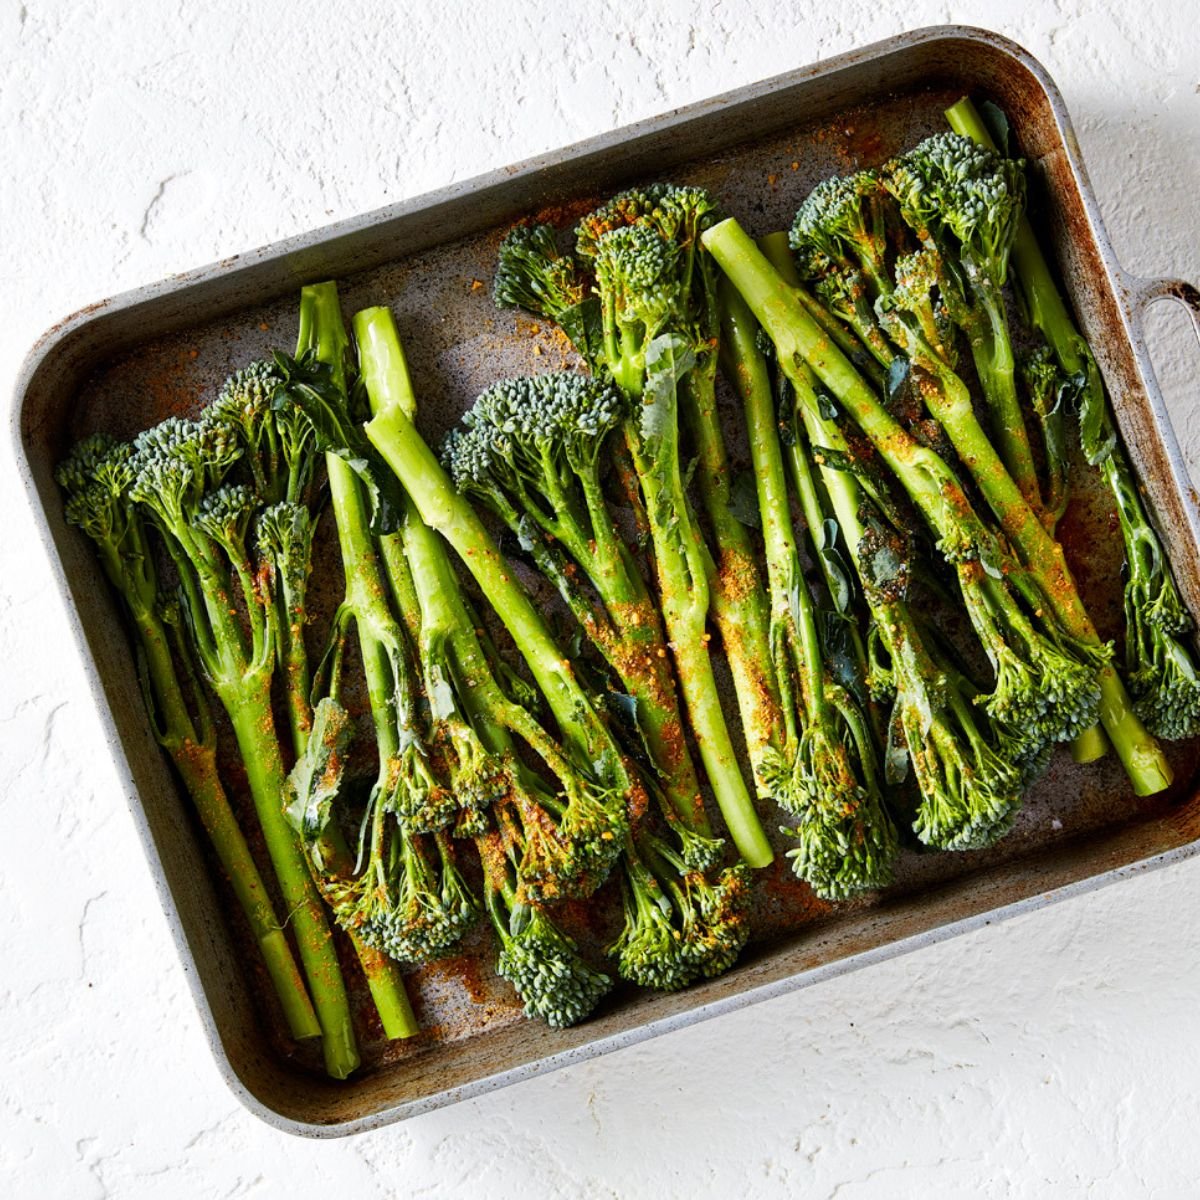 Raw broccolini placed in an oven roasting tray, and sprinkled with seasonings.